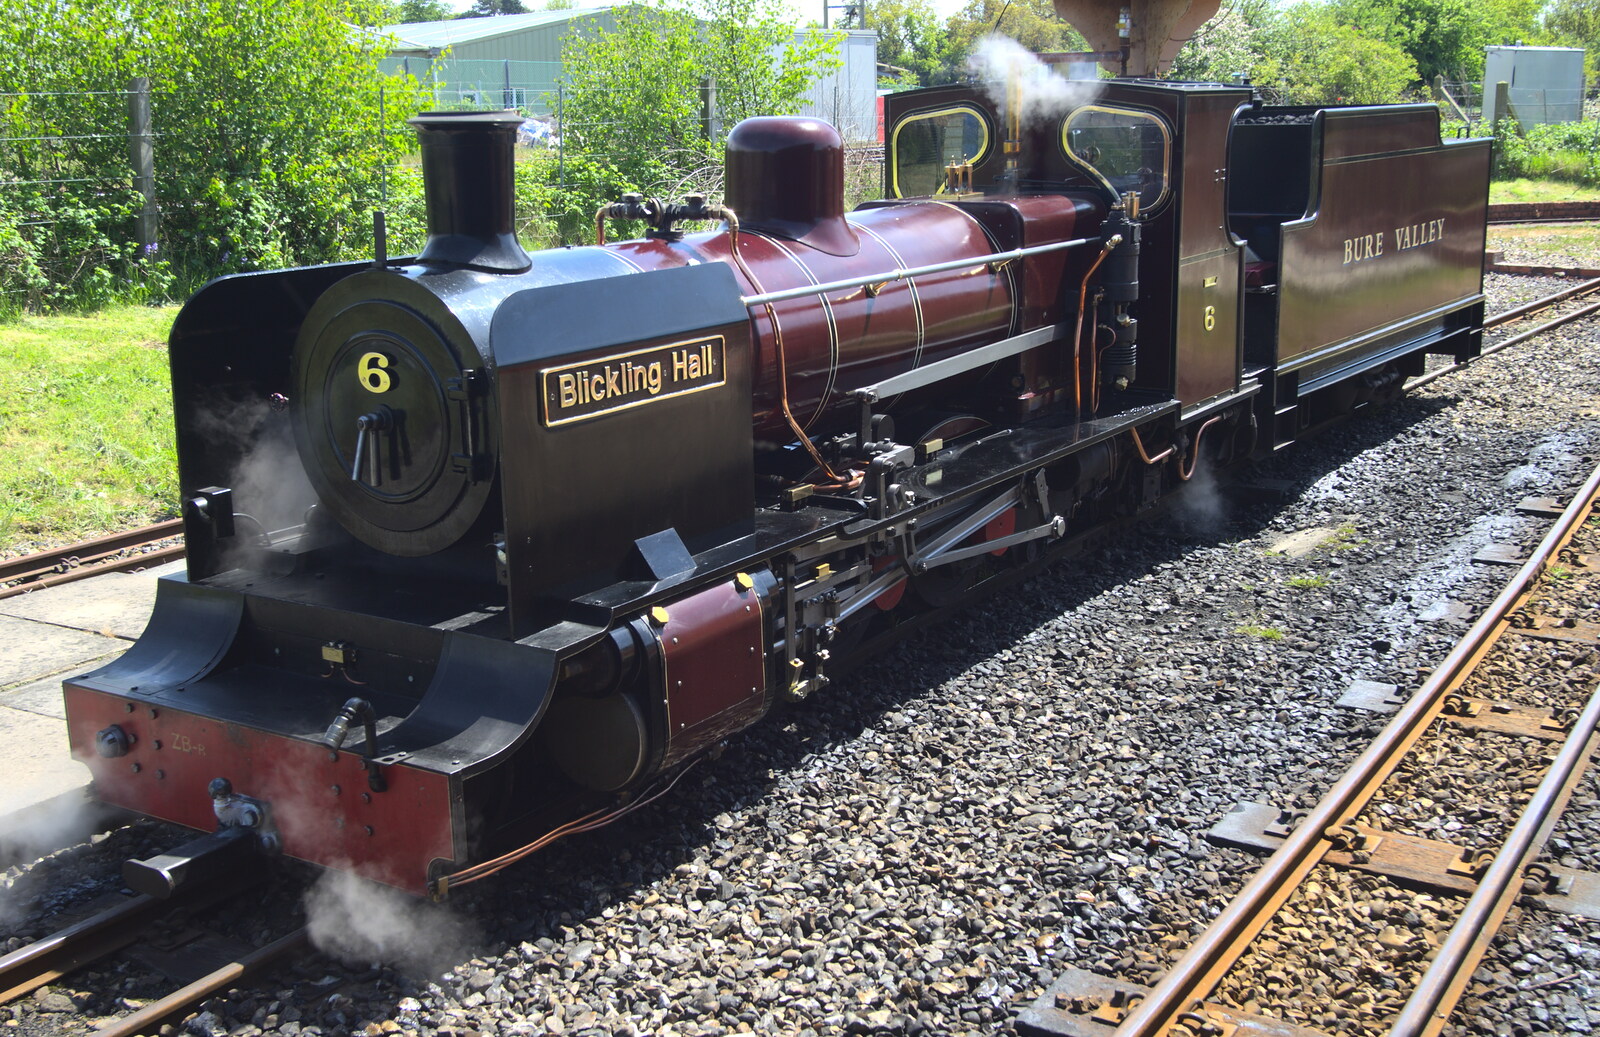 The engine 'Blickling Hall' from The Bure Valley Railway, Aylsham, Norfolk - 26th May 2013